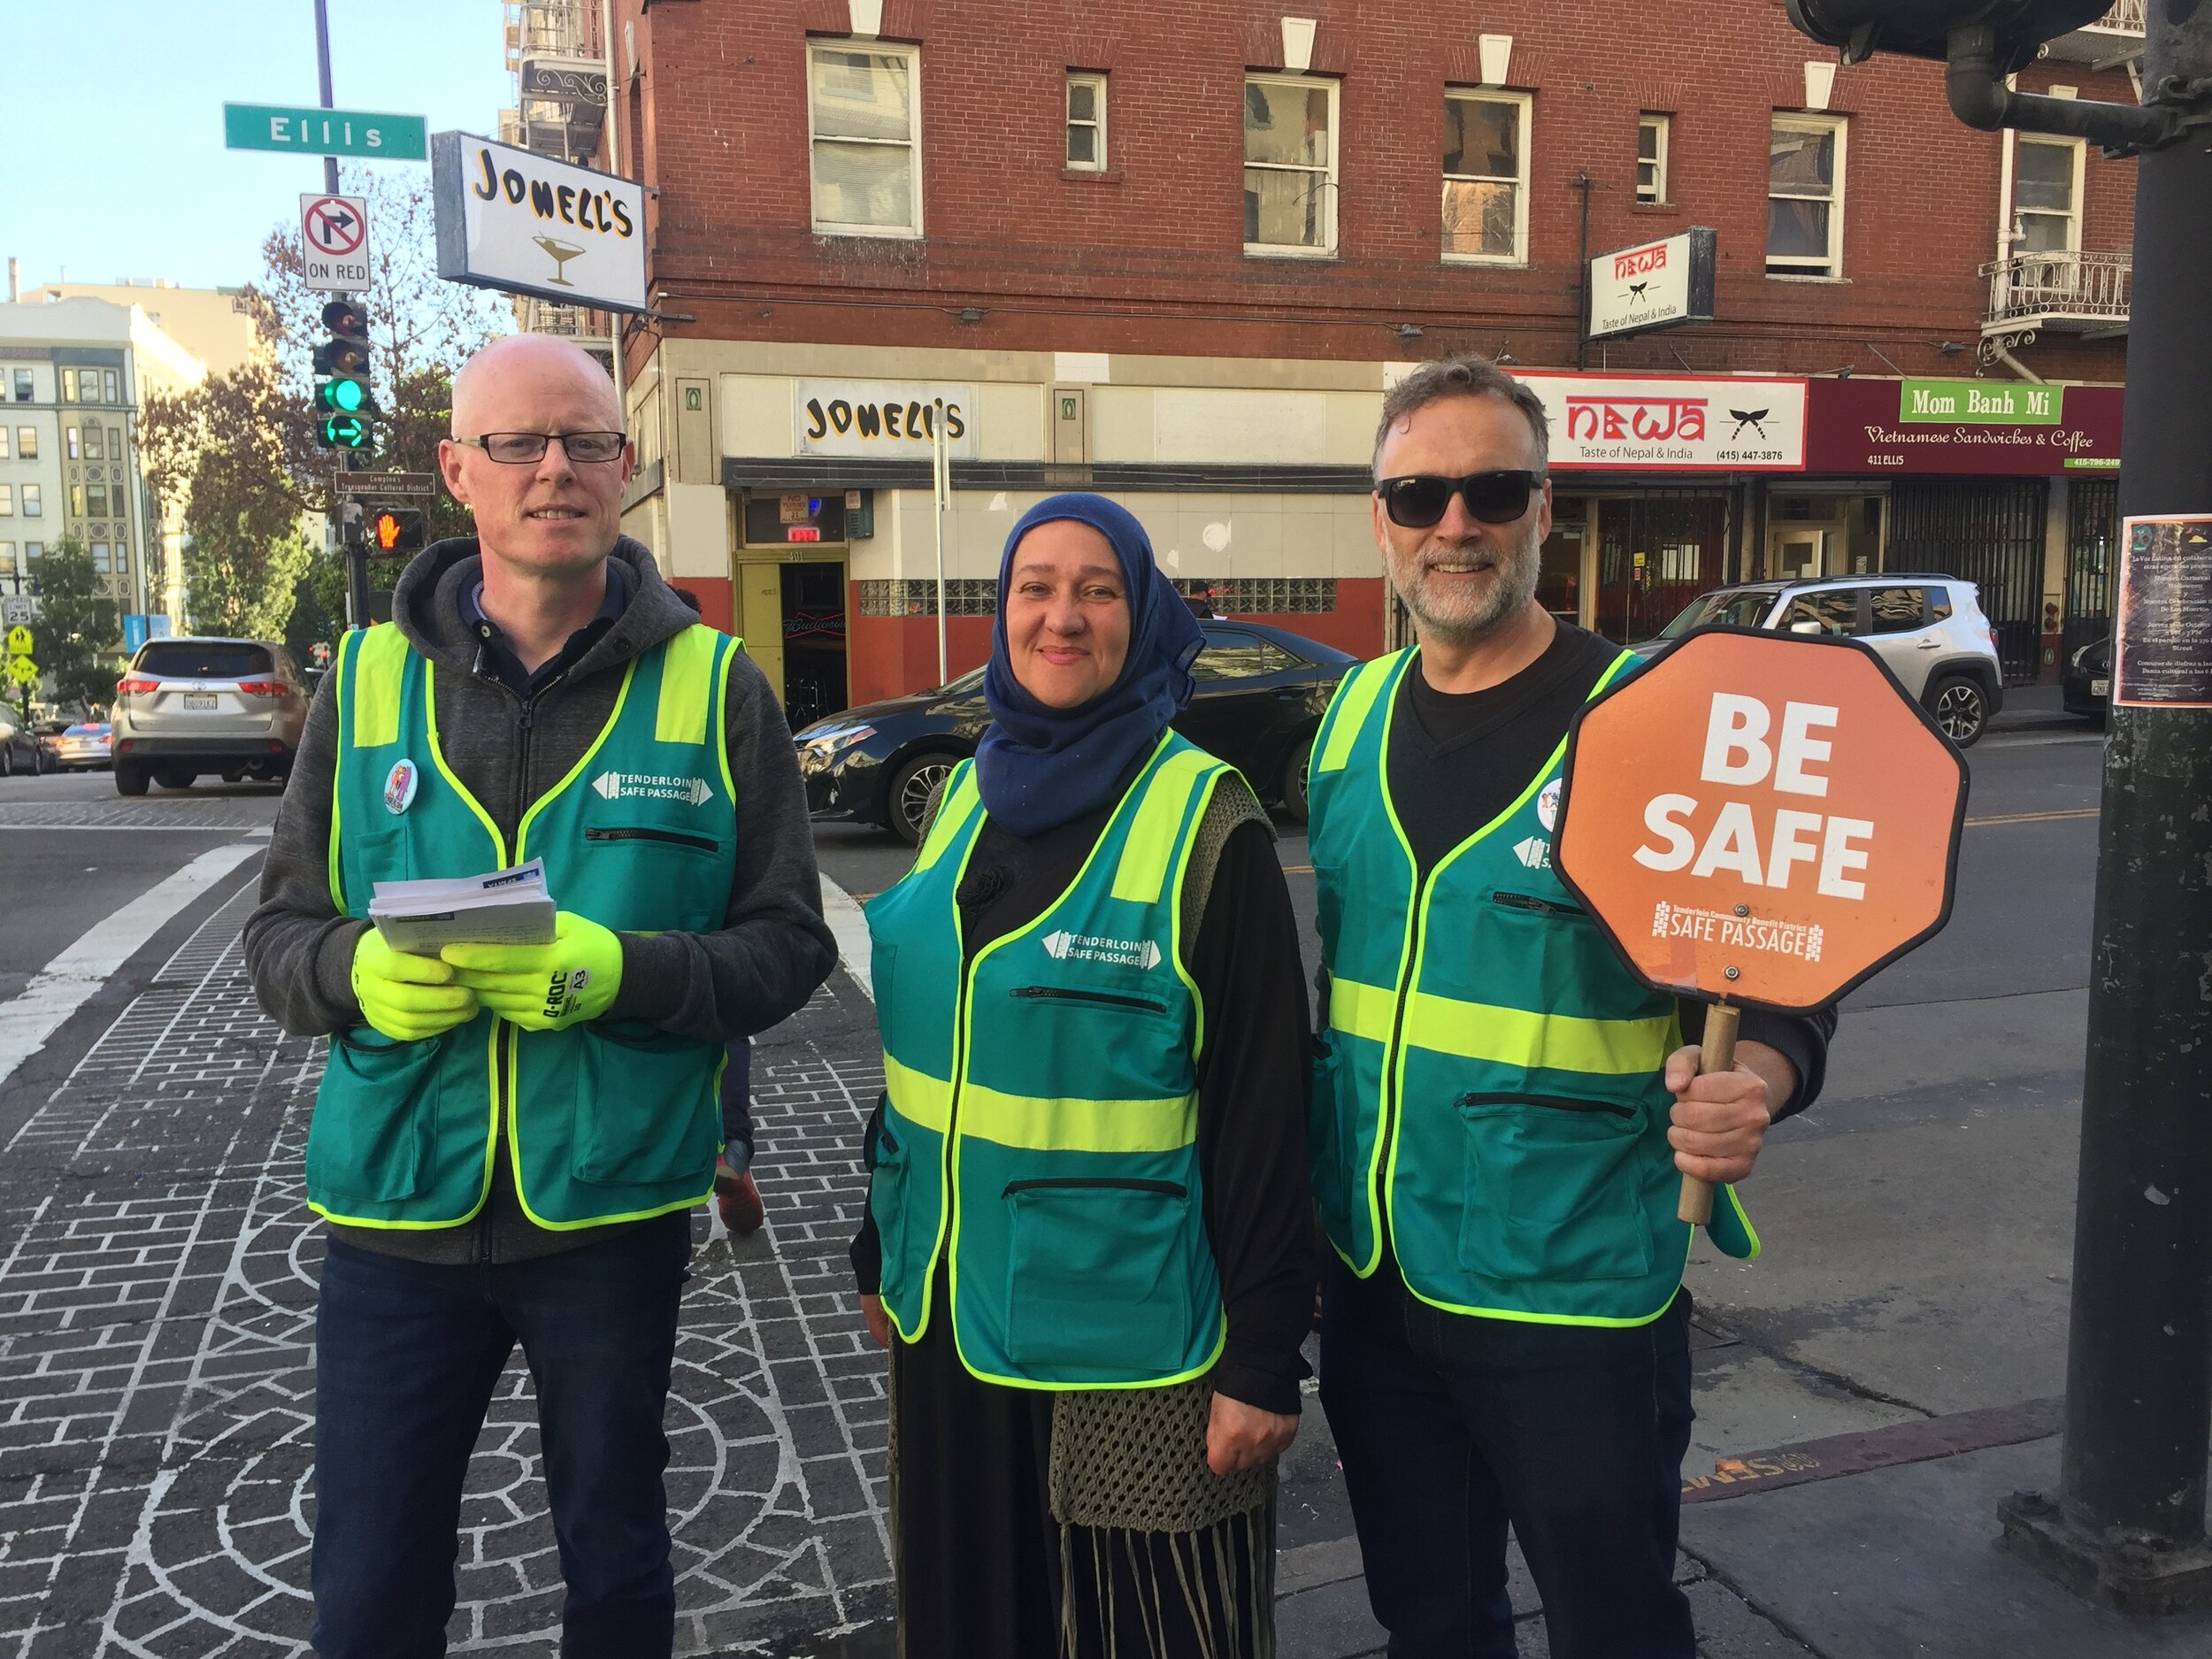 Left to Right: Brian, Tatiana, Eric of TLCBD’s Safety Campaign